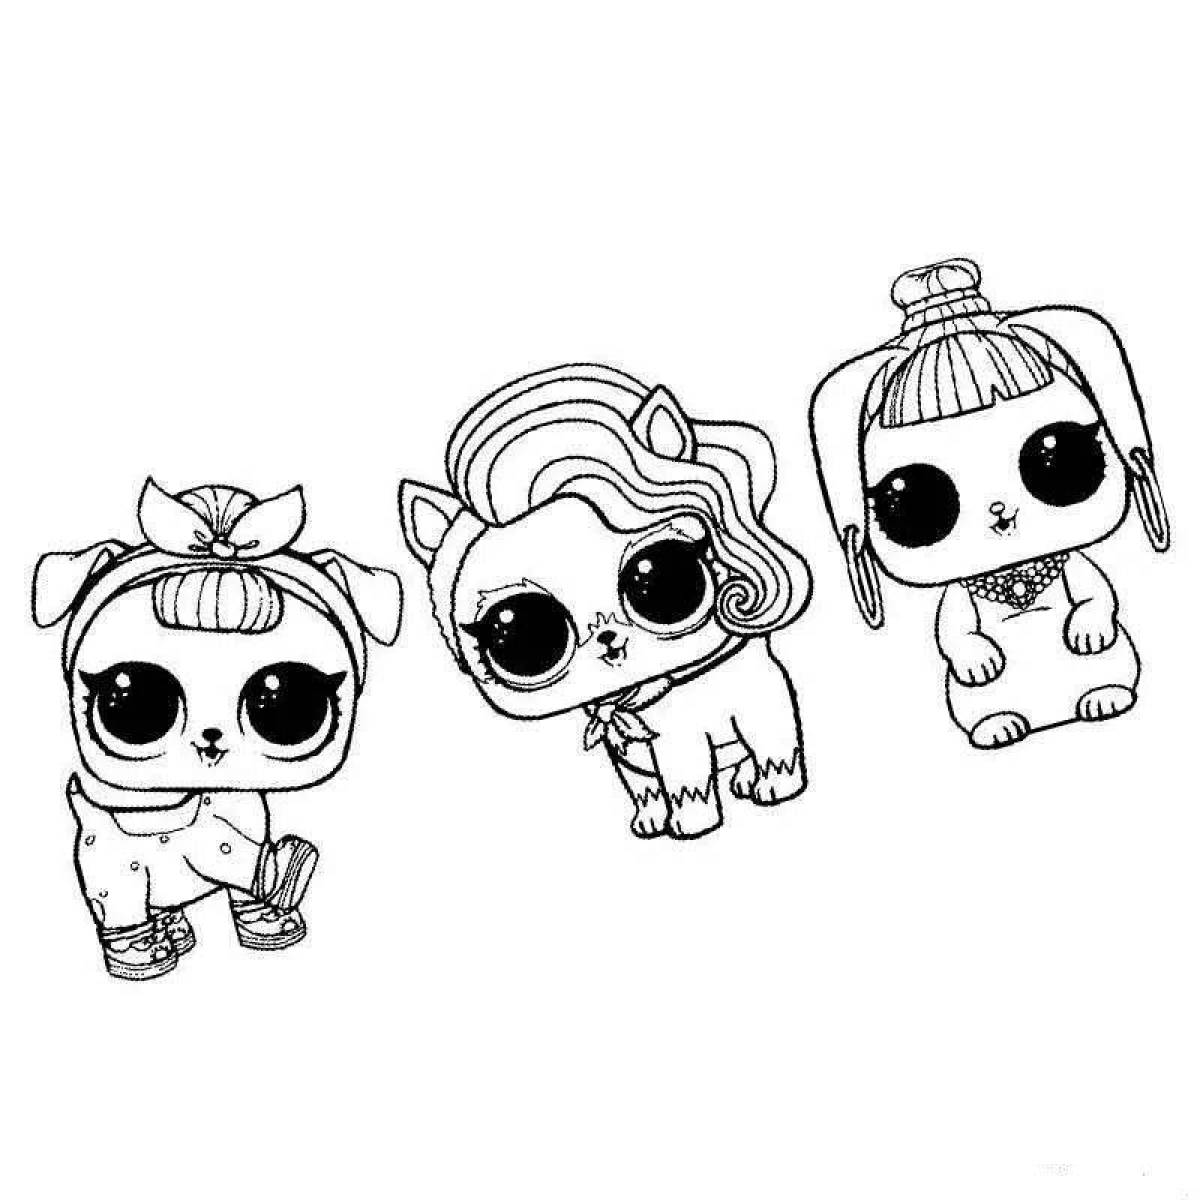 Amazing coloring pages for lol animals dolls